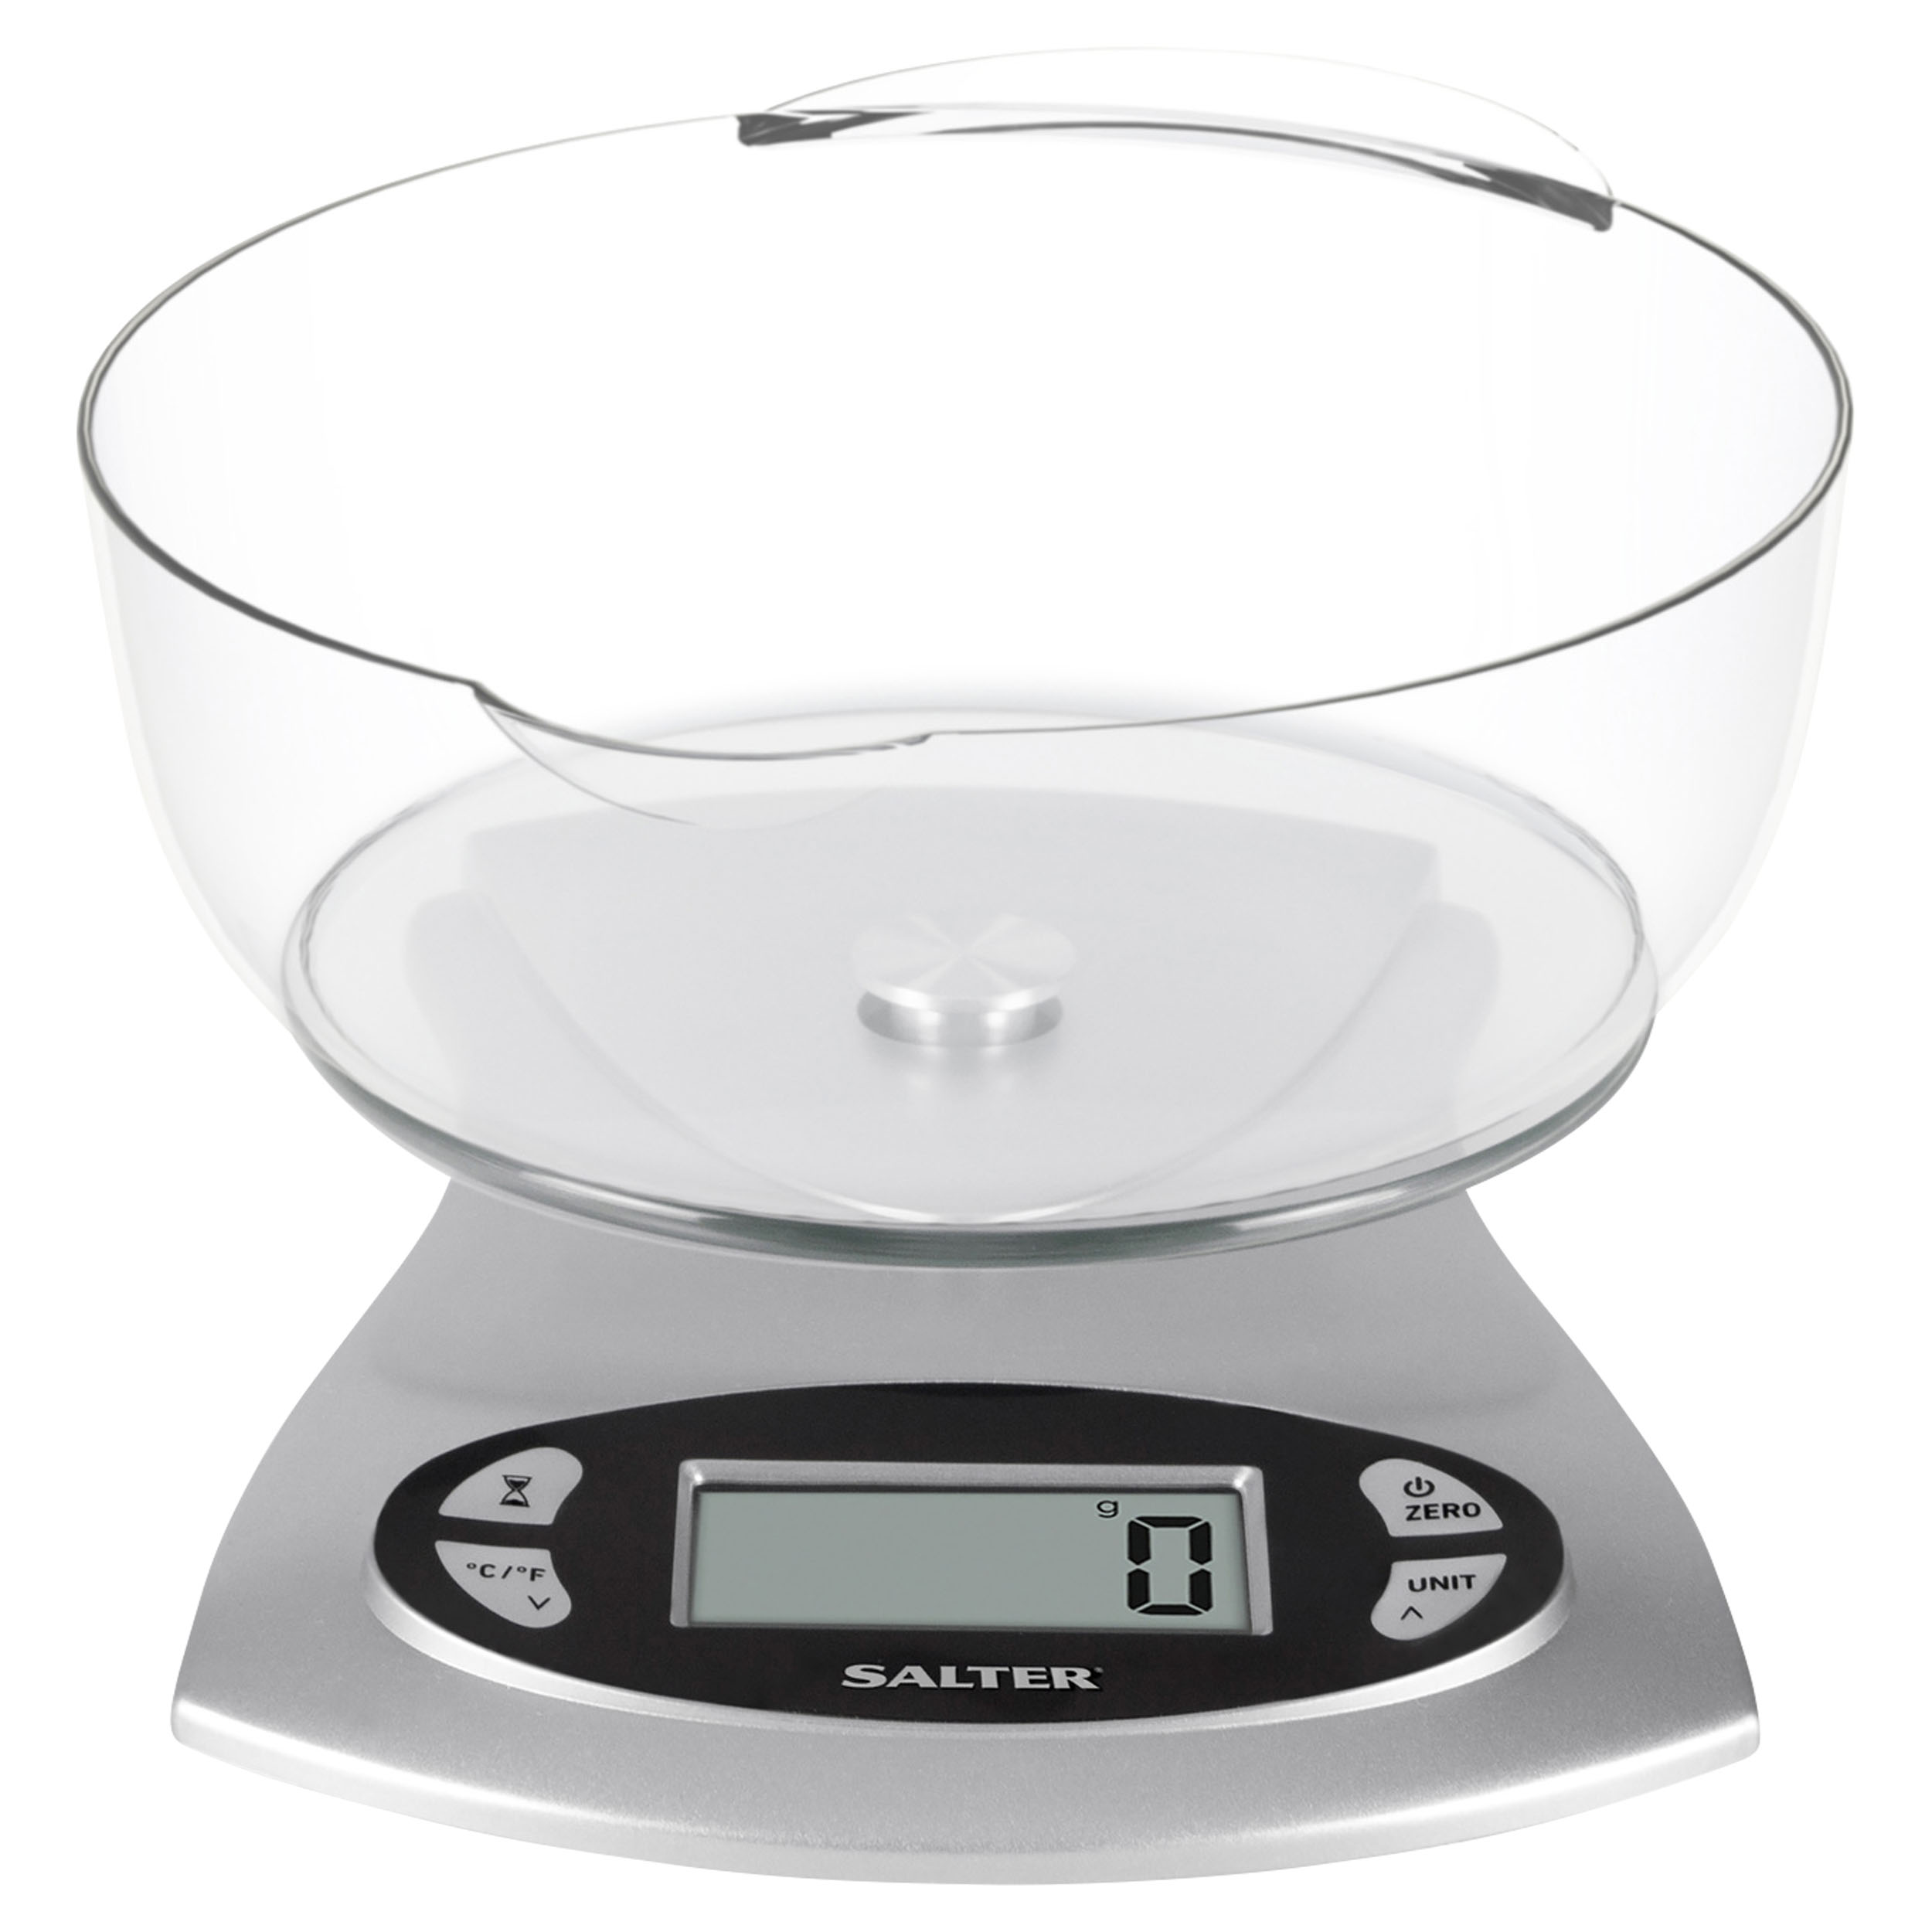 Salter 1069 Bowl Electronic Scale - Tesco Groceries